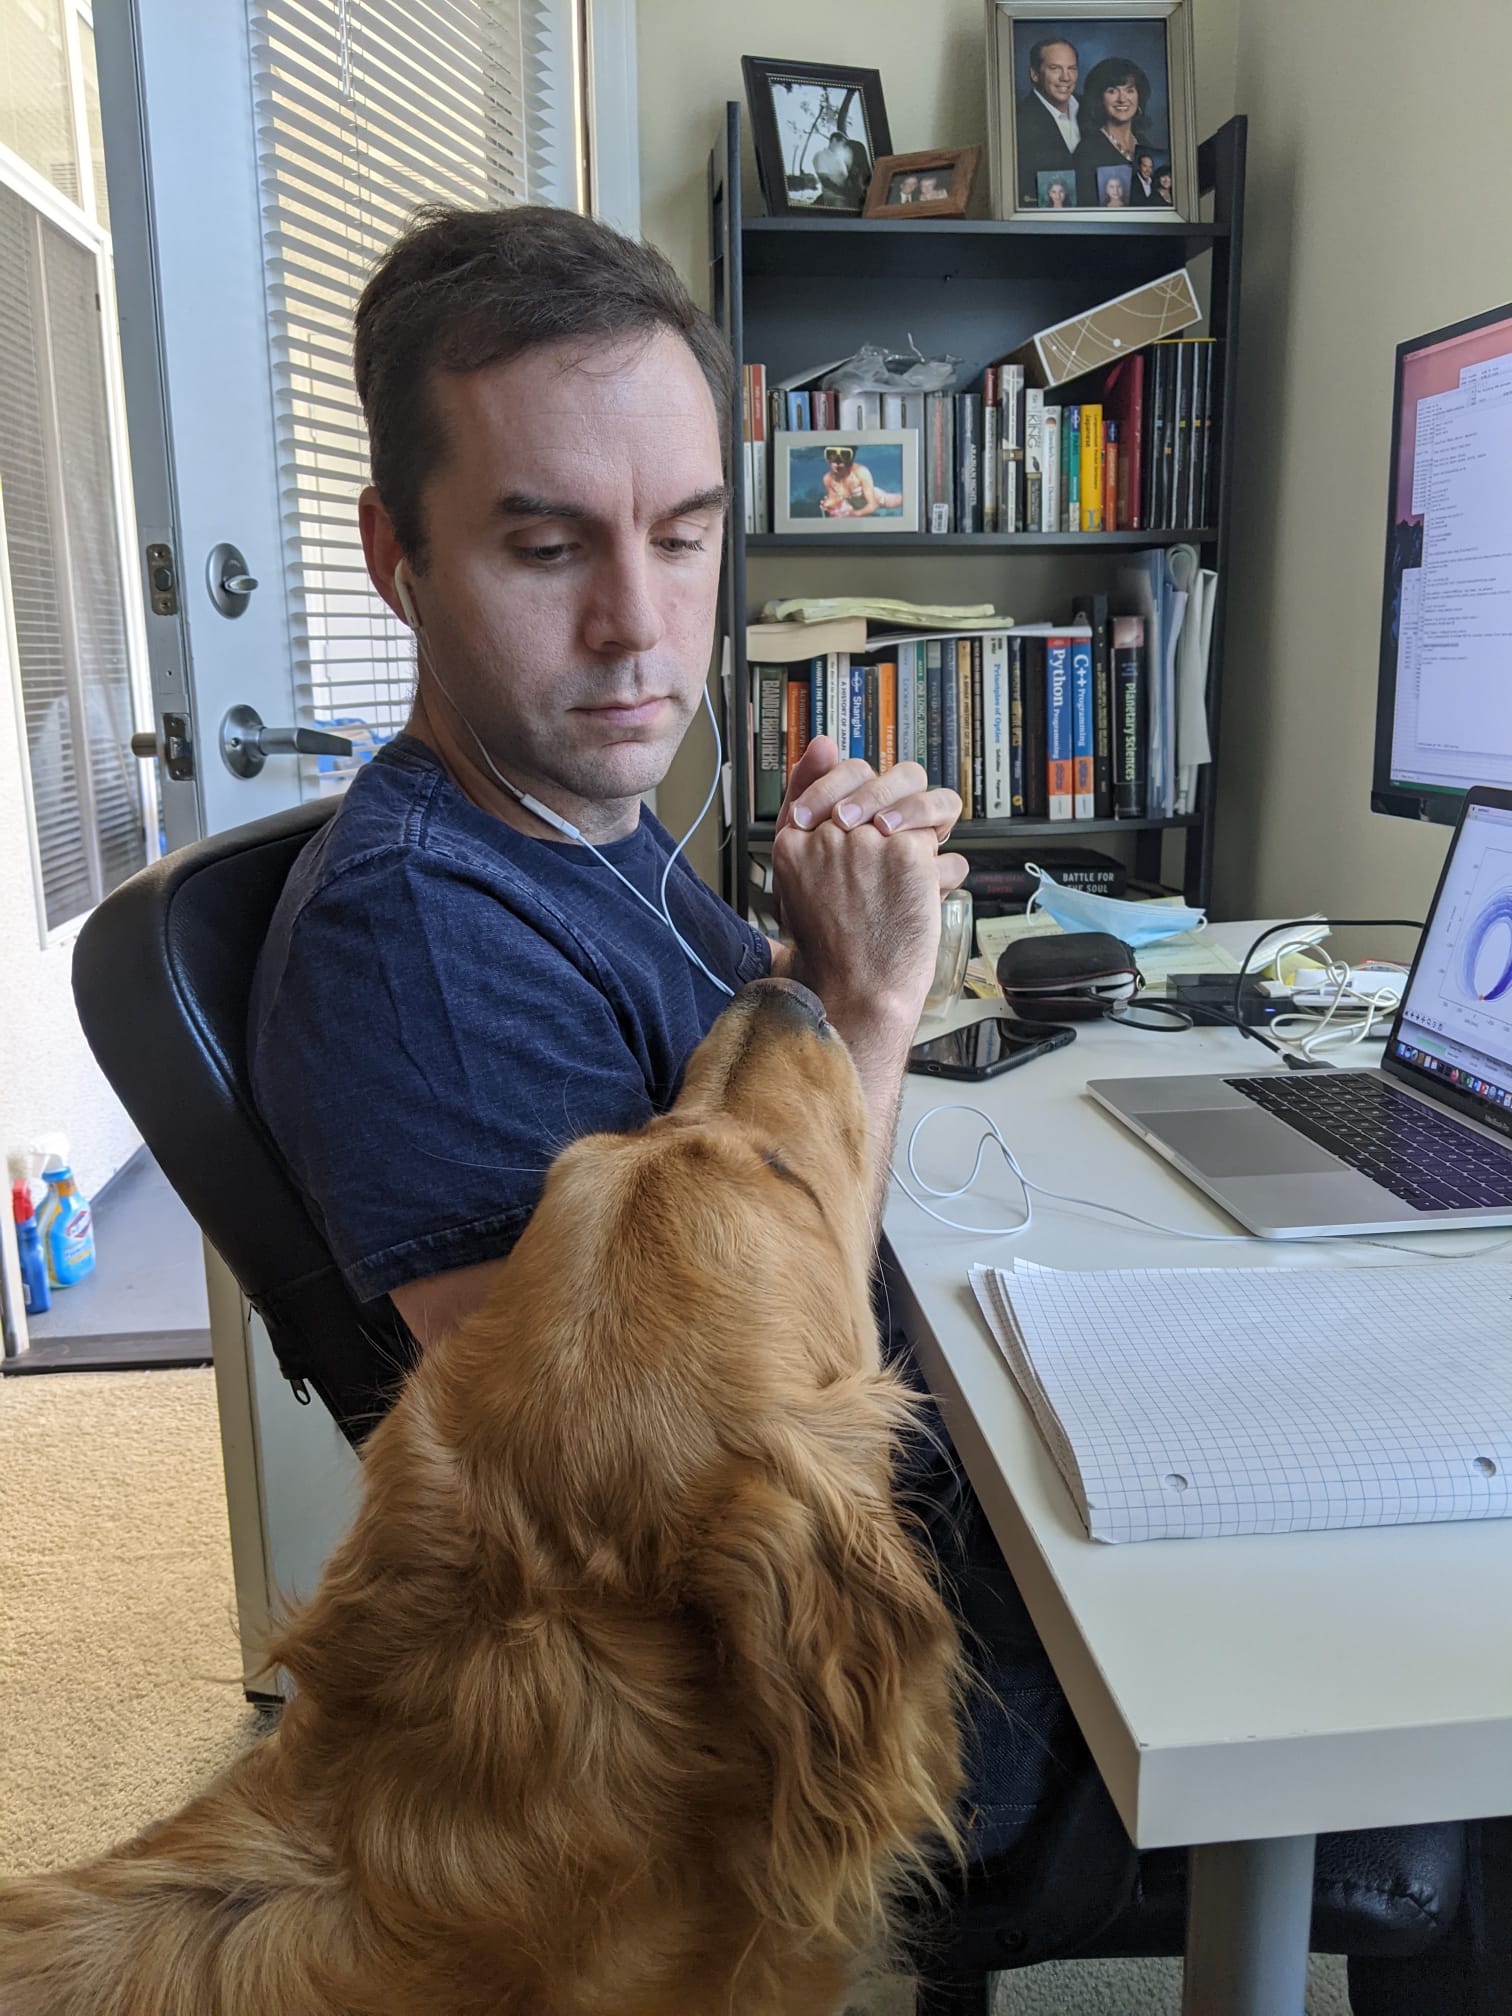 A recent image of Thayne trying to work remotely with his dog begging for food/attention